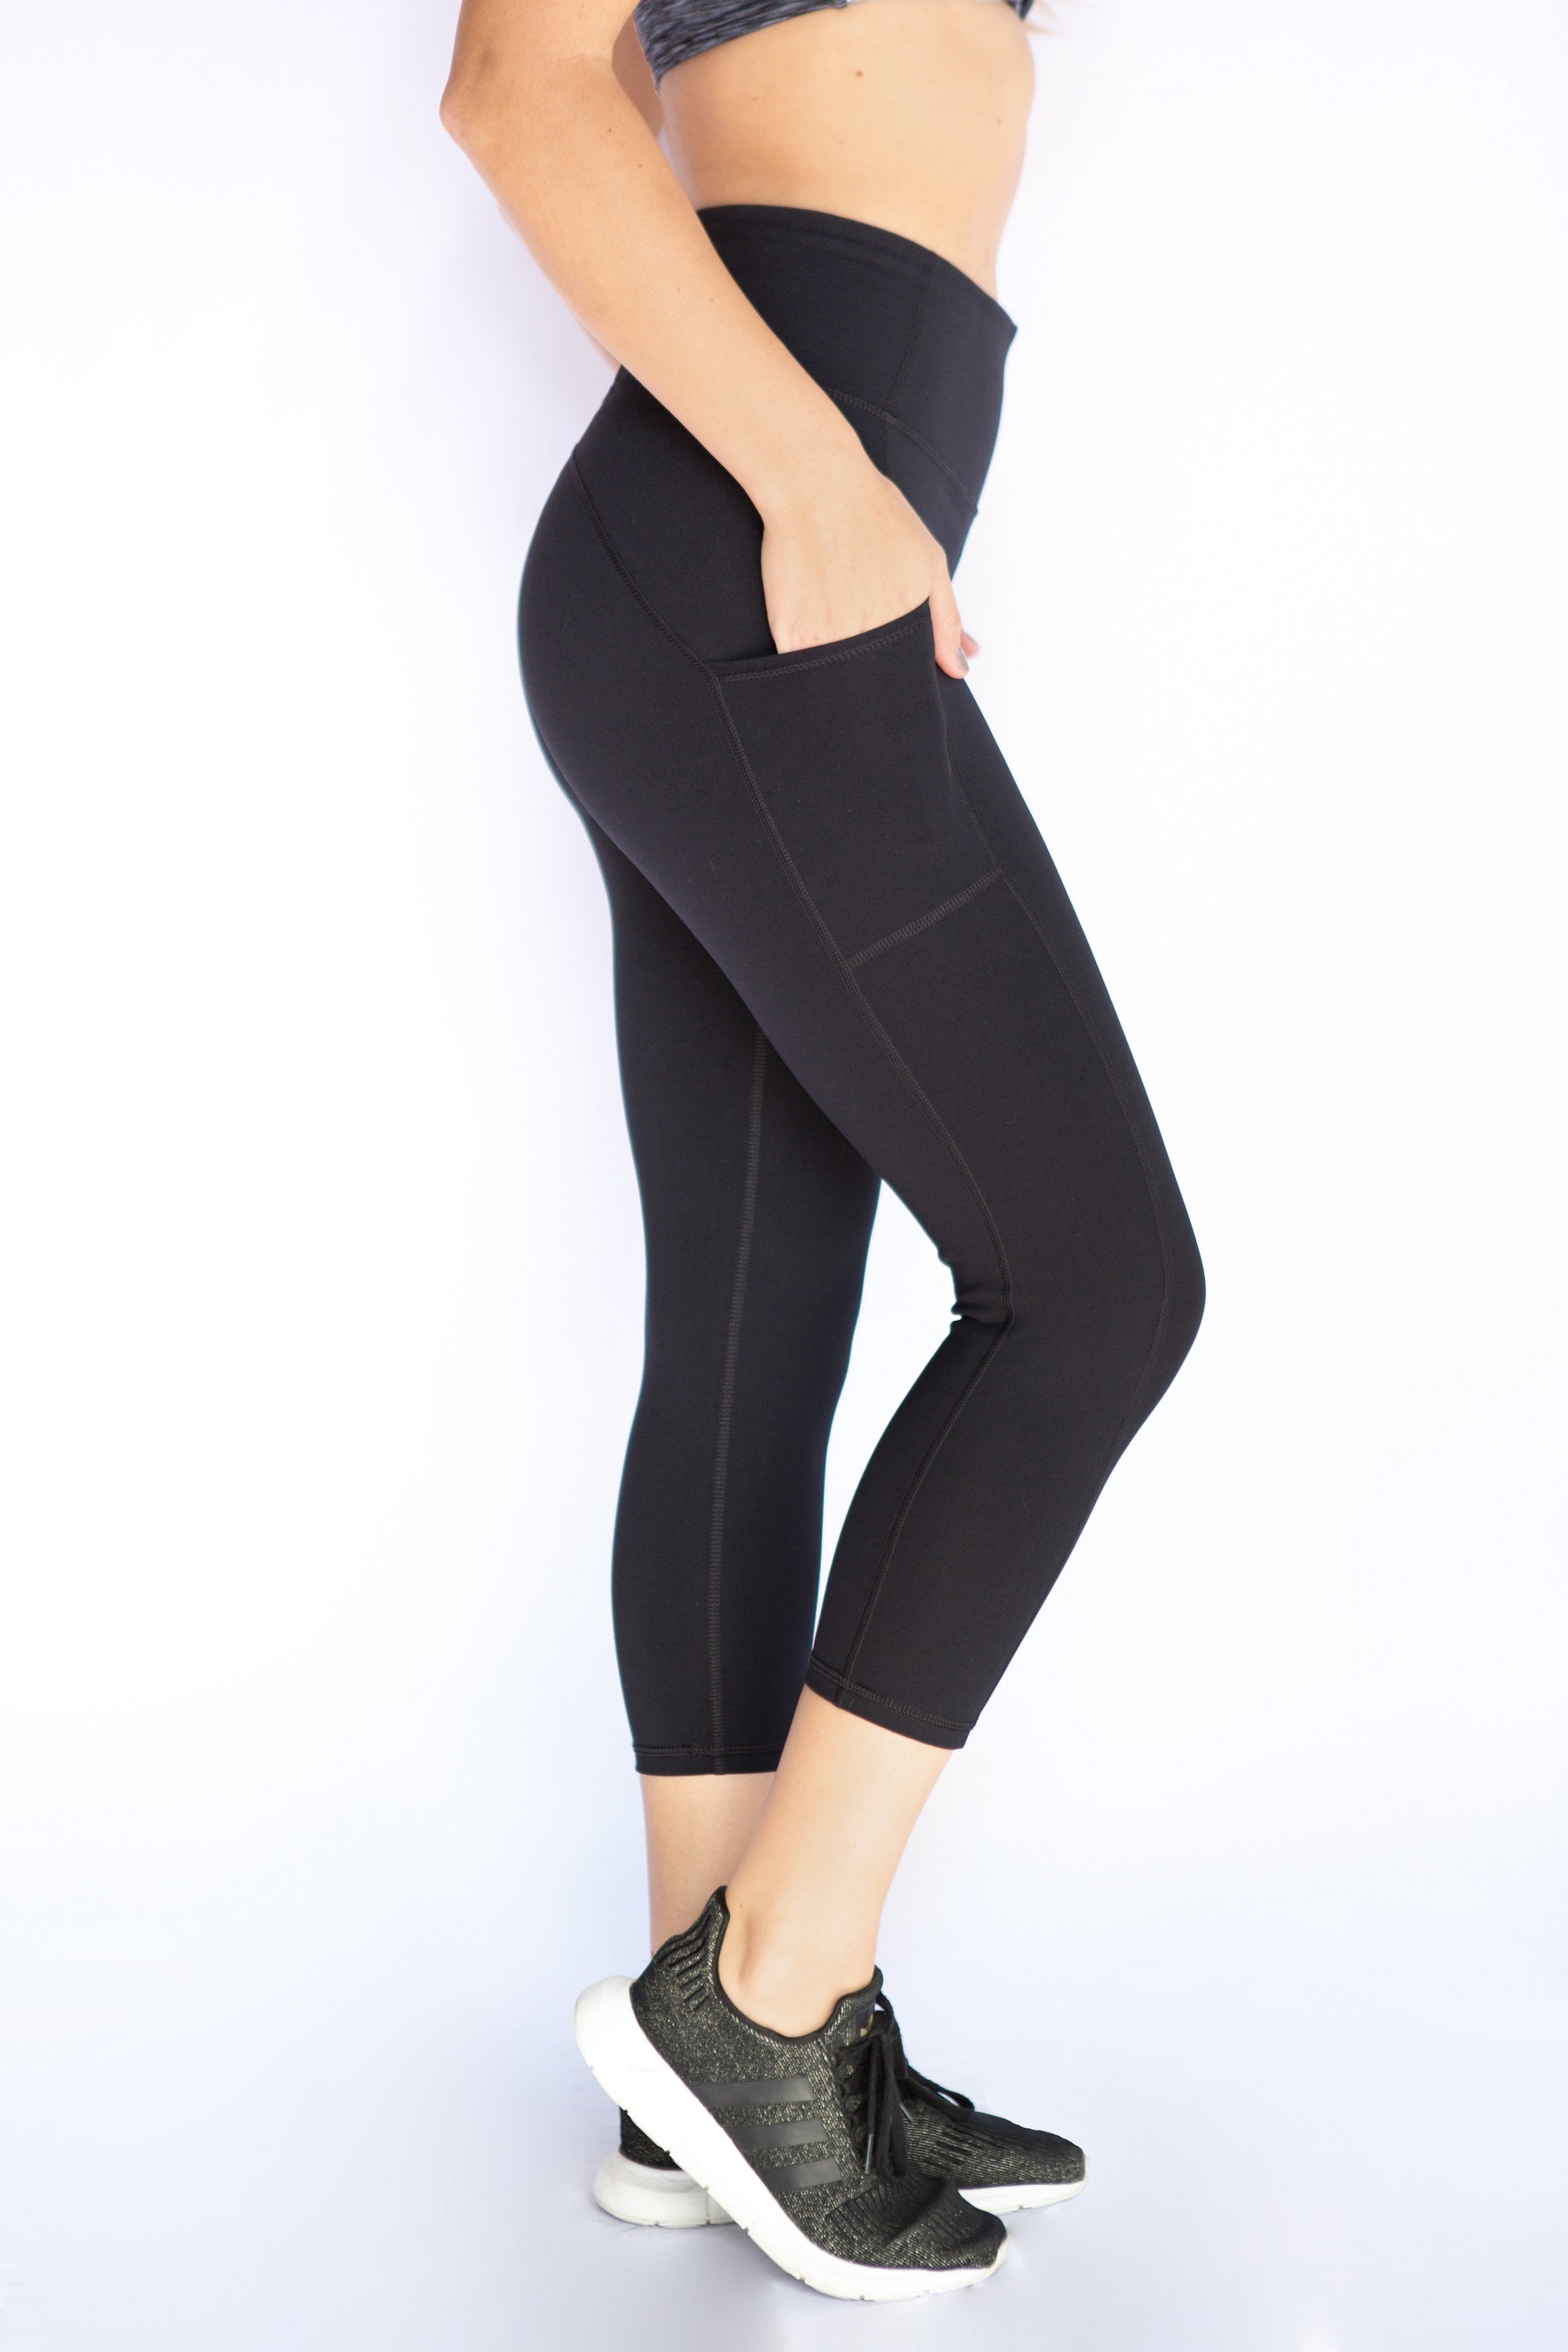 17 Best Leggings With Pockets Of 2023, Per Reviews